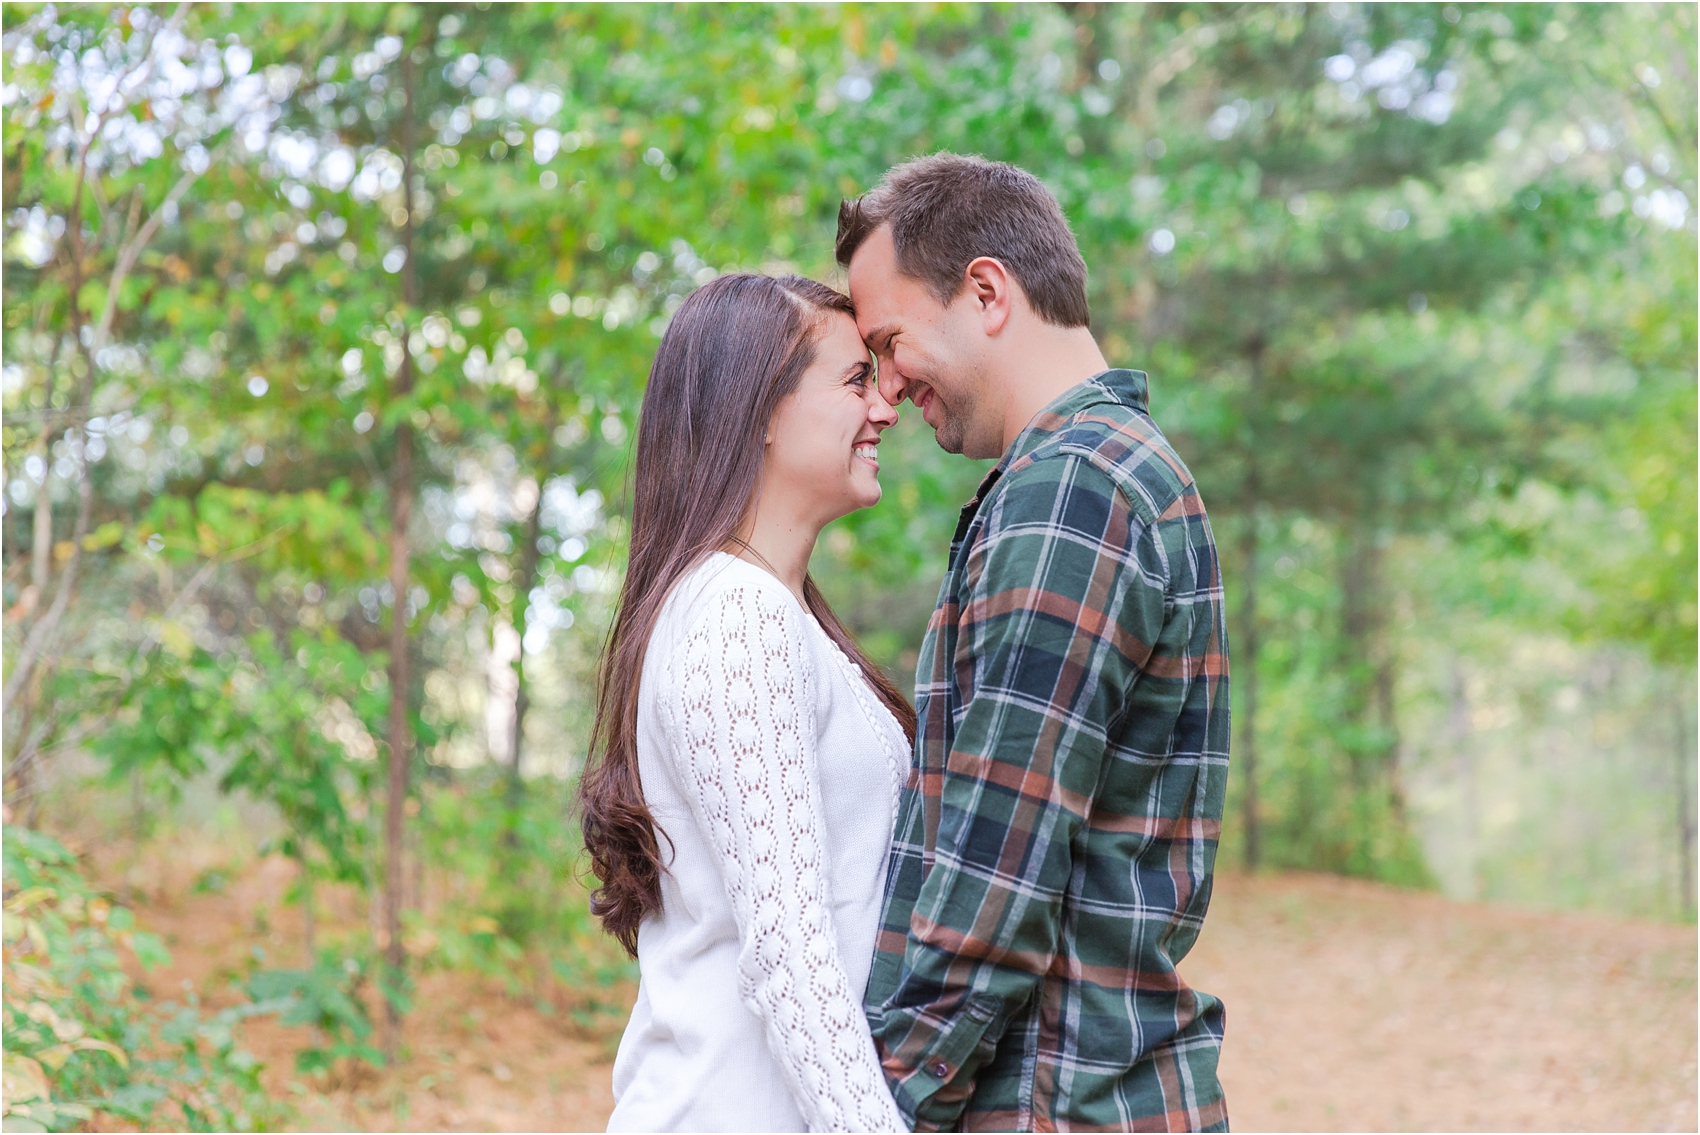 relaxed-autumn-engagement-photos-at-hudson-mills-metropark-in-dexter-mi-by-courtney-carolyn-photography_0009.jpg